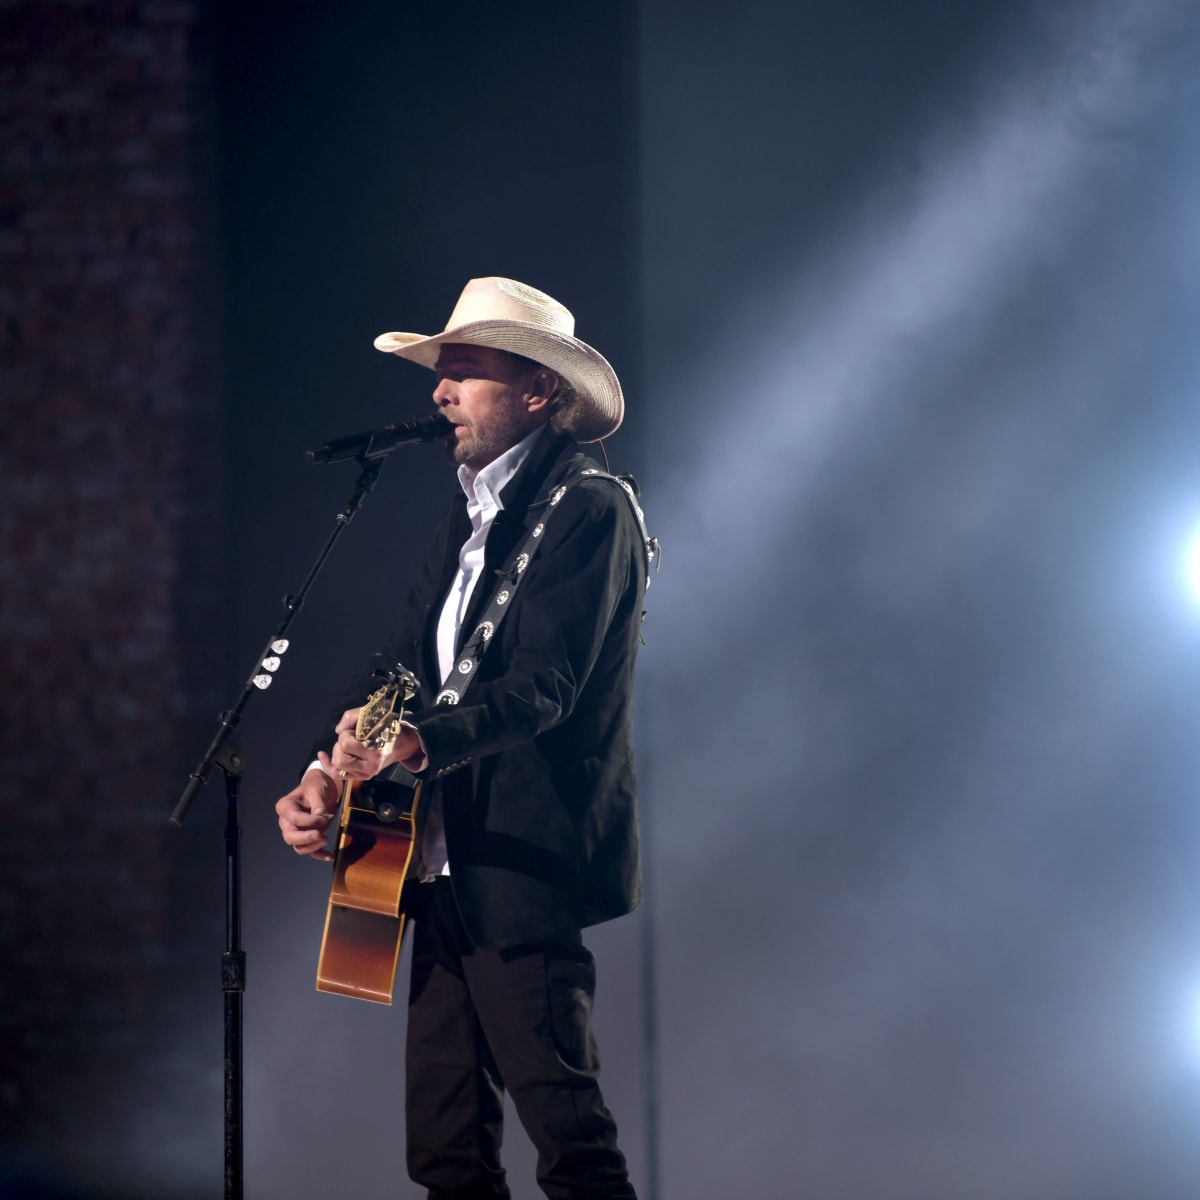 Toby Keith's Performance After Cancer Reveal: His 1st Full Show